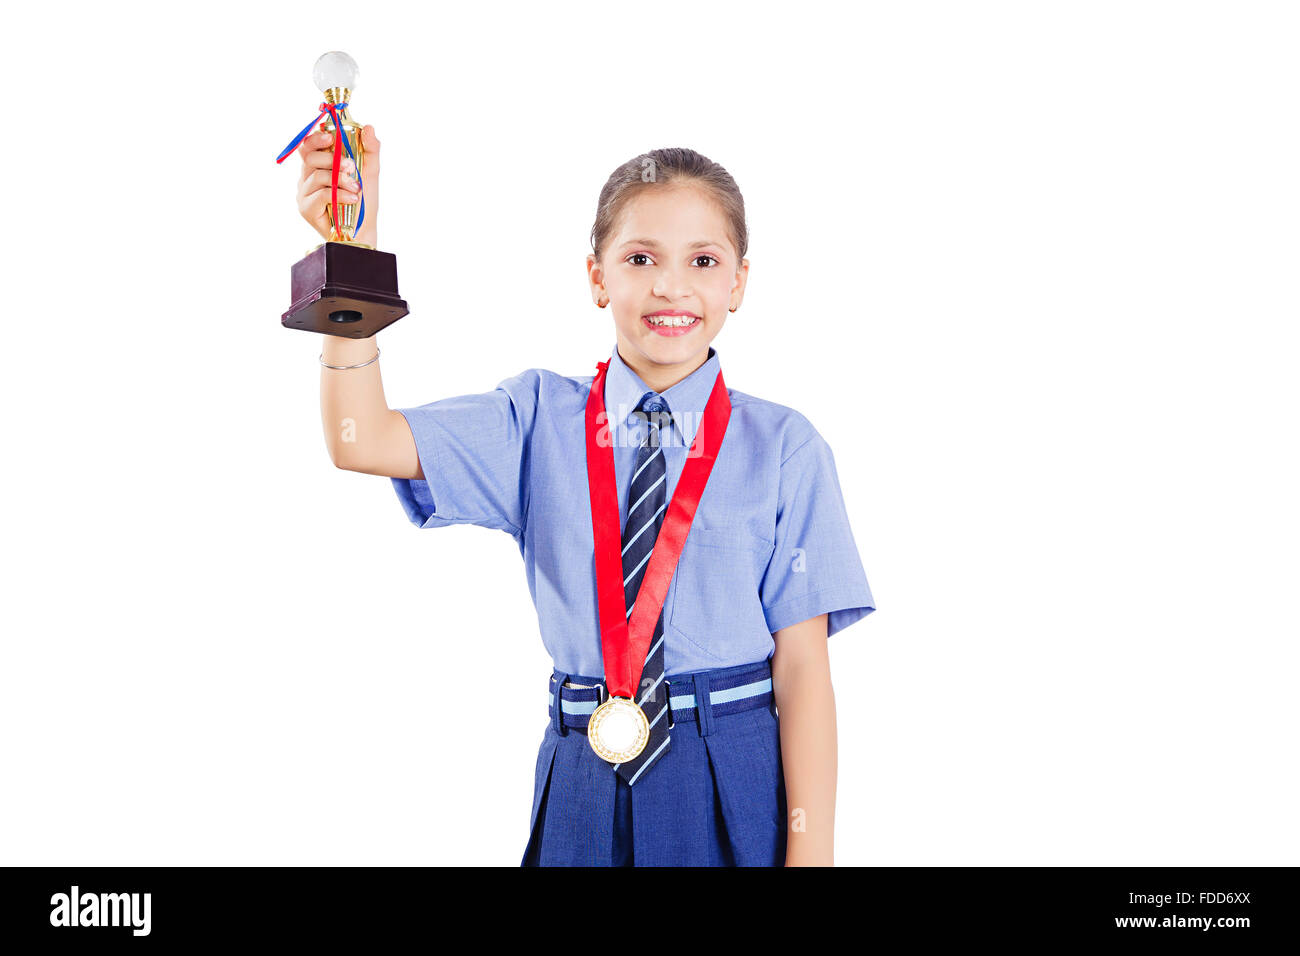 1 Child Girl School Student Victory Trophy Showing Stock Photo